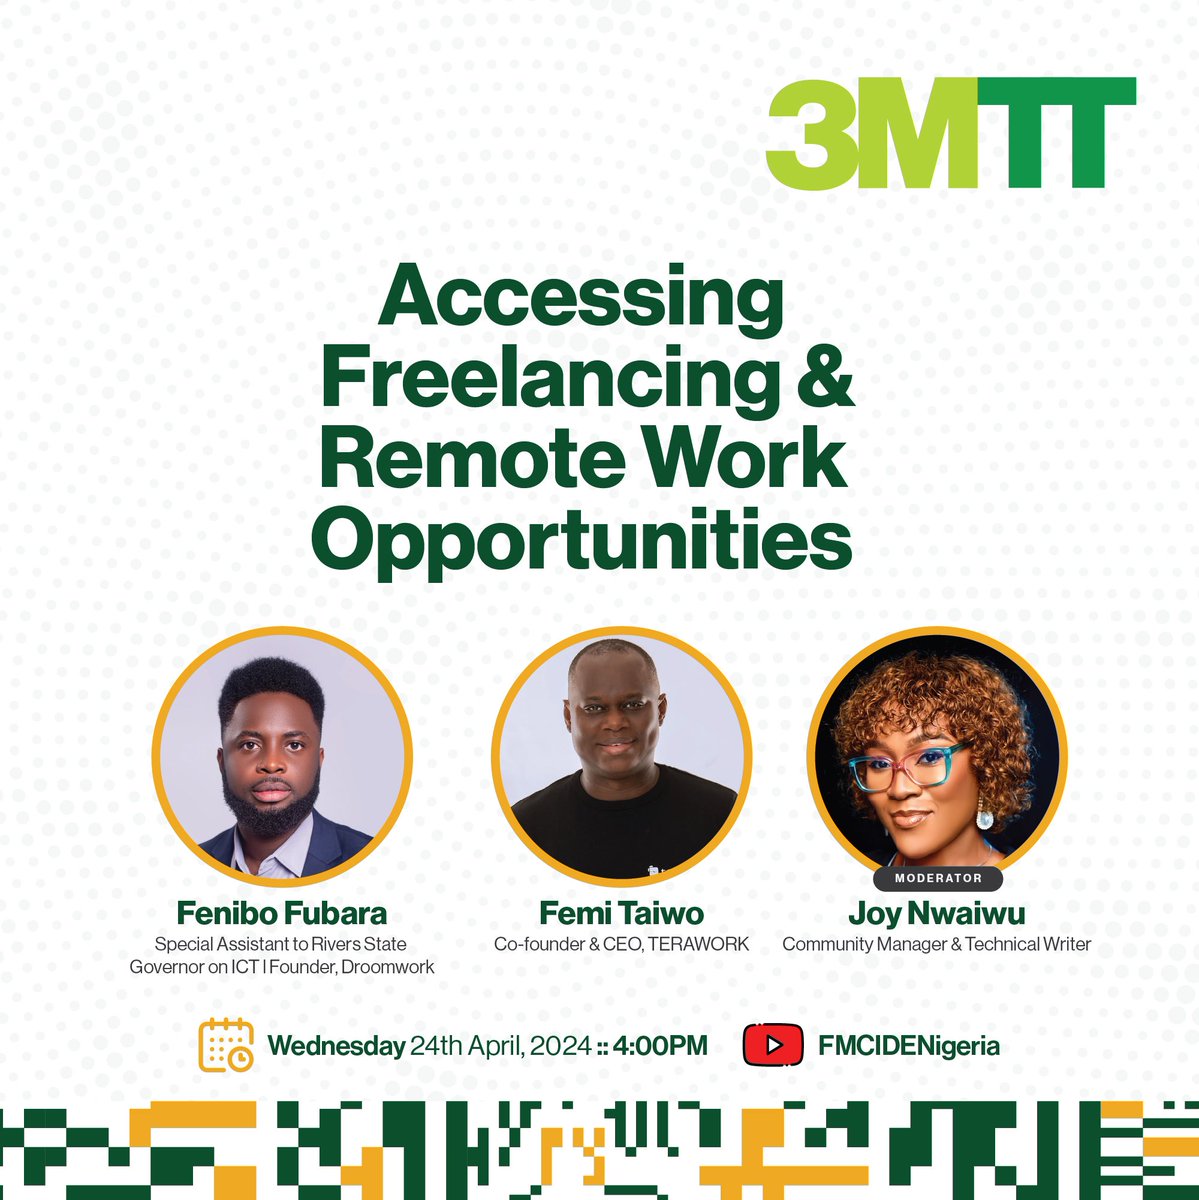 Join us today at 4:00 pm for our webinar on 'Accessing Freelancing & Remote Work Opportunities'! Don't miss this chance to explore a new way of working that could transform your career. 

See you there: b.link/WrkOpp.3MTTyt!